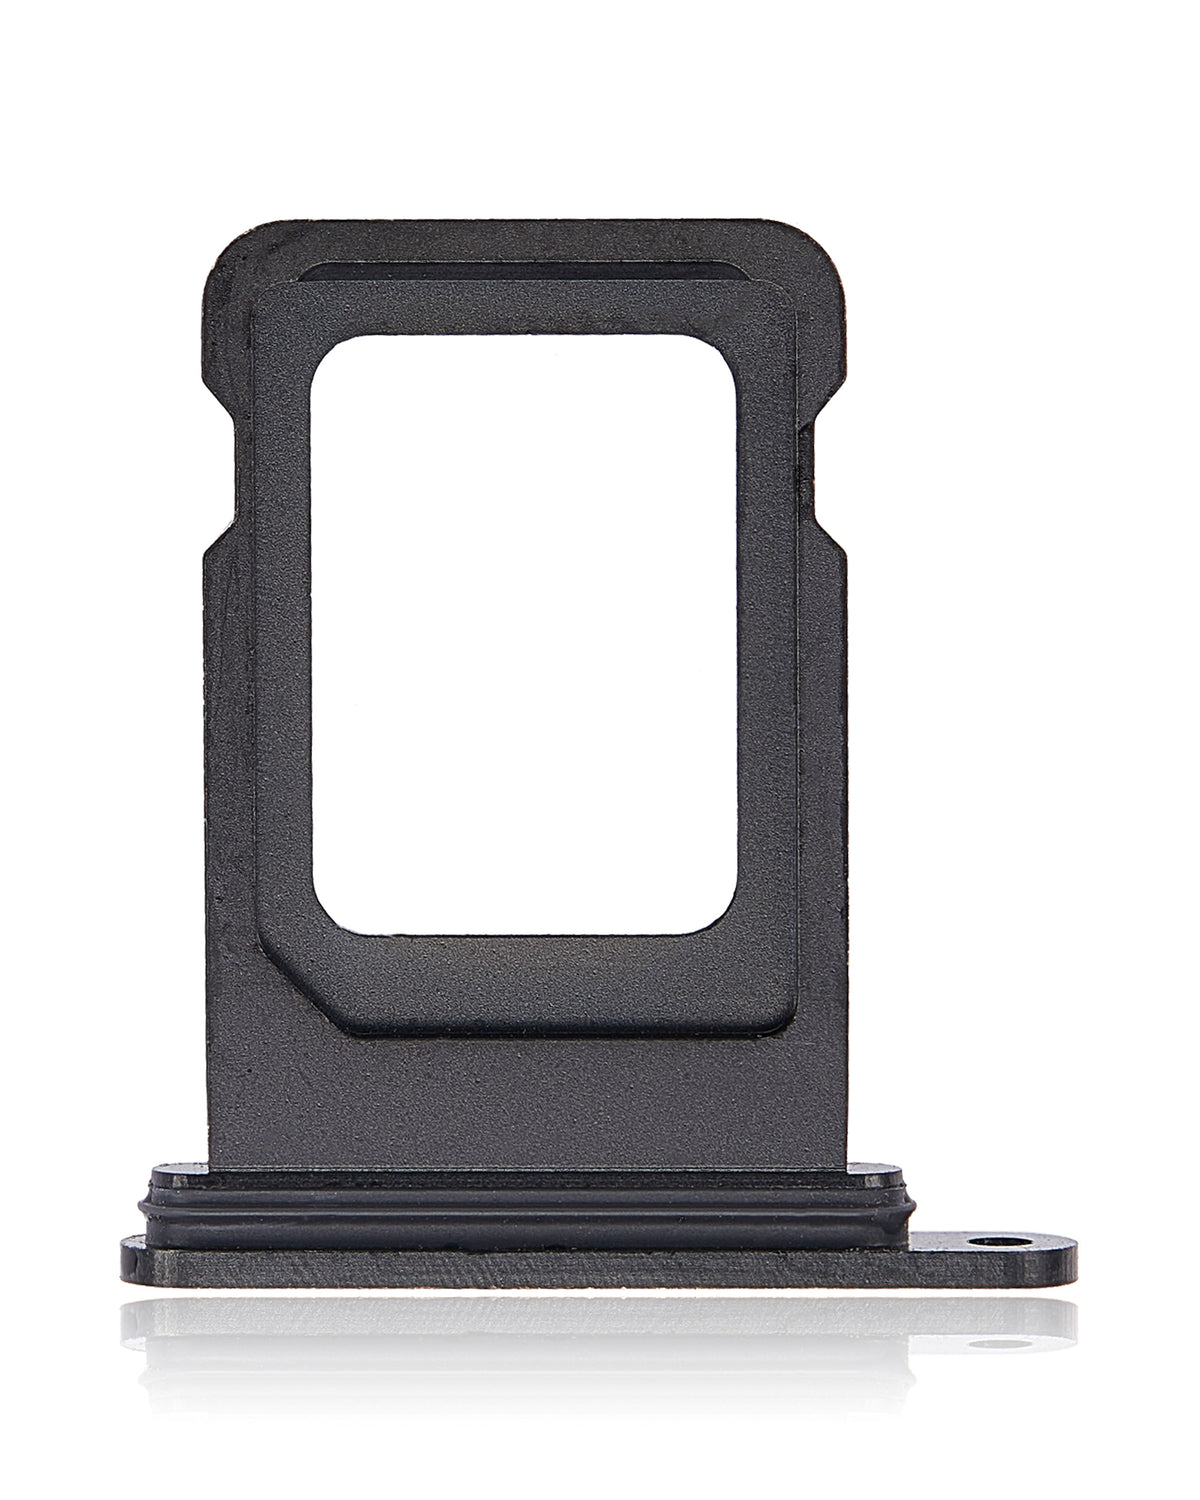 SPACE BLACK SIM CARD TRAY COMPATIBLE WITH IPHONE 14 PRO / 14 PRO MAX